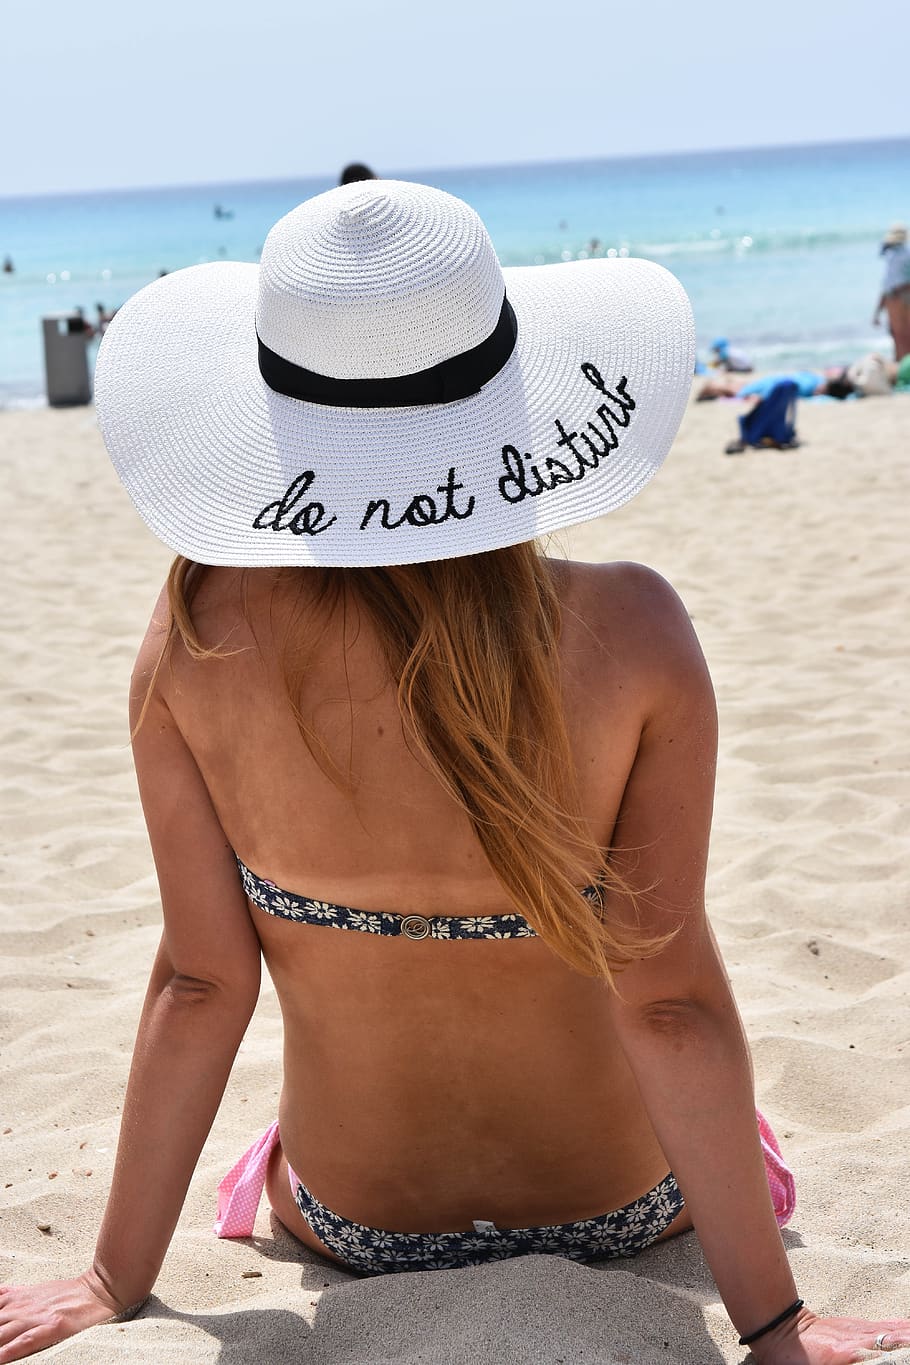 holidays, beach, sand, sea, summer, water, the coast, relaxation, hat, girl